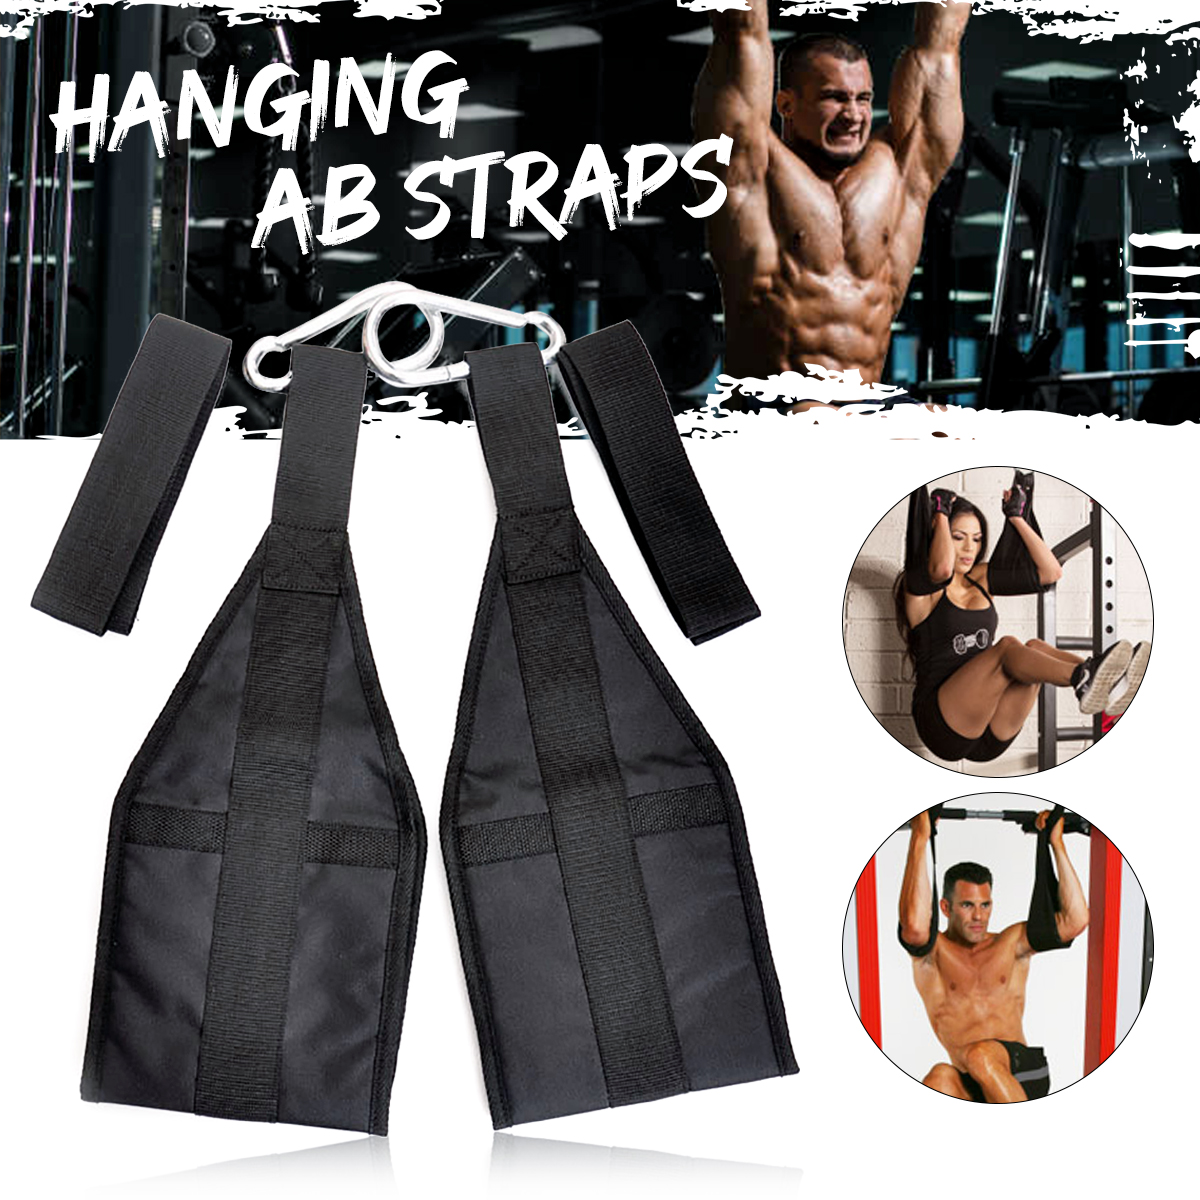 Fitness-Ab-Slings-Straps-Pull-Up-Bar-Straps-Core-Arm-Abdominal-Muscle-Training-Hanging-Straps-Exerci-1679315-1